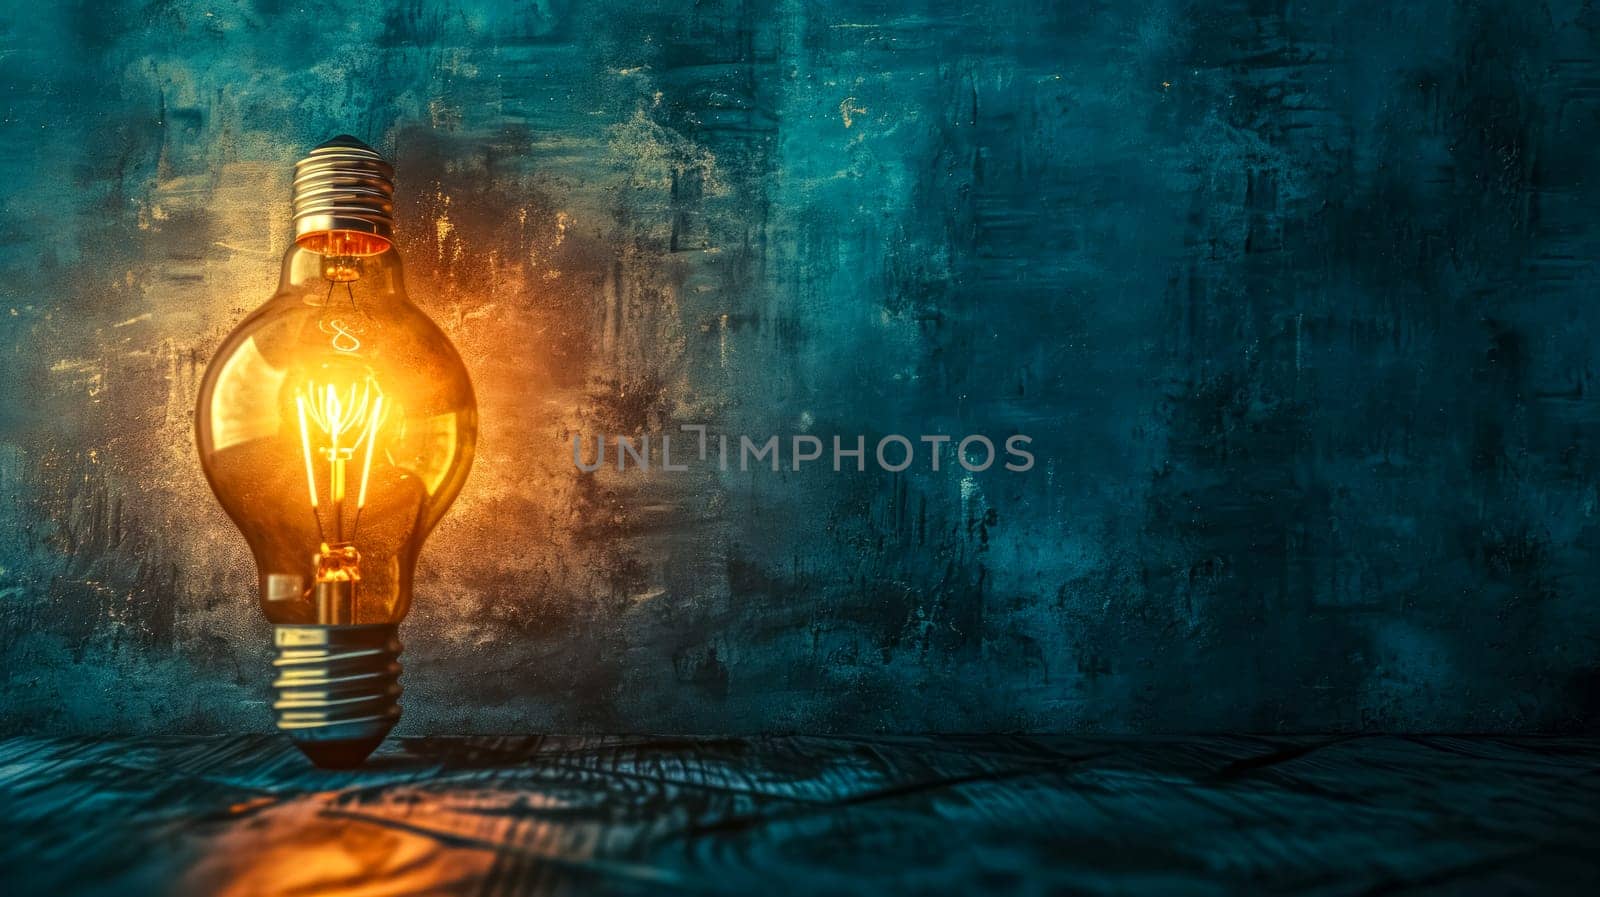 glowing light bulb against a textured blue background, symbolizing ideas and inspiration by Edophoto